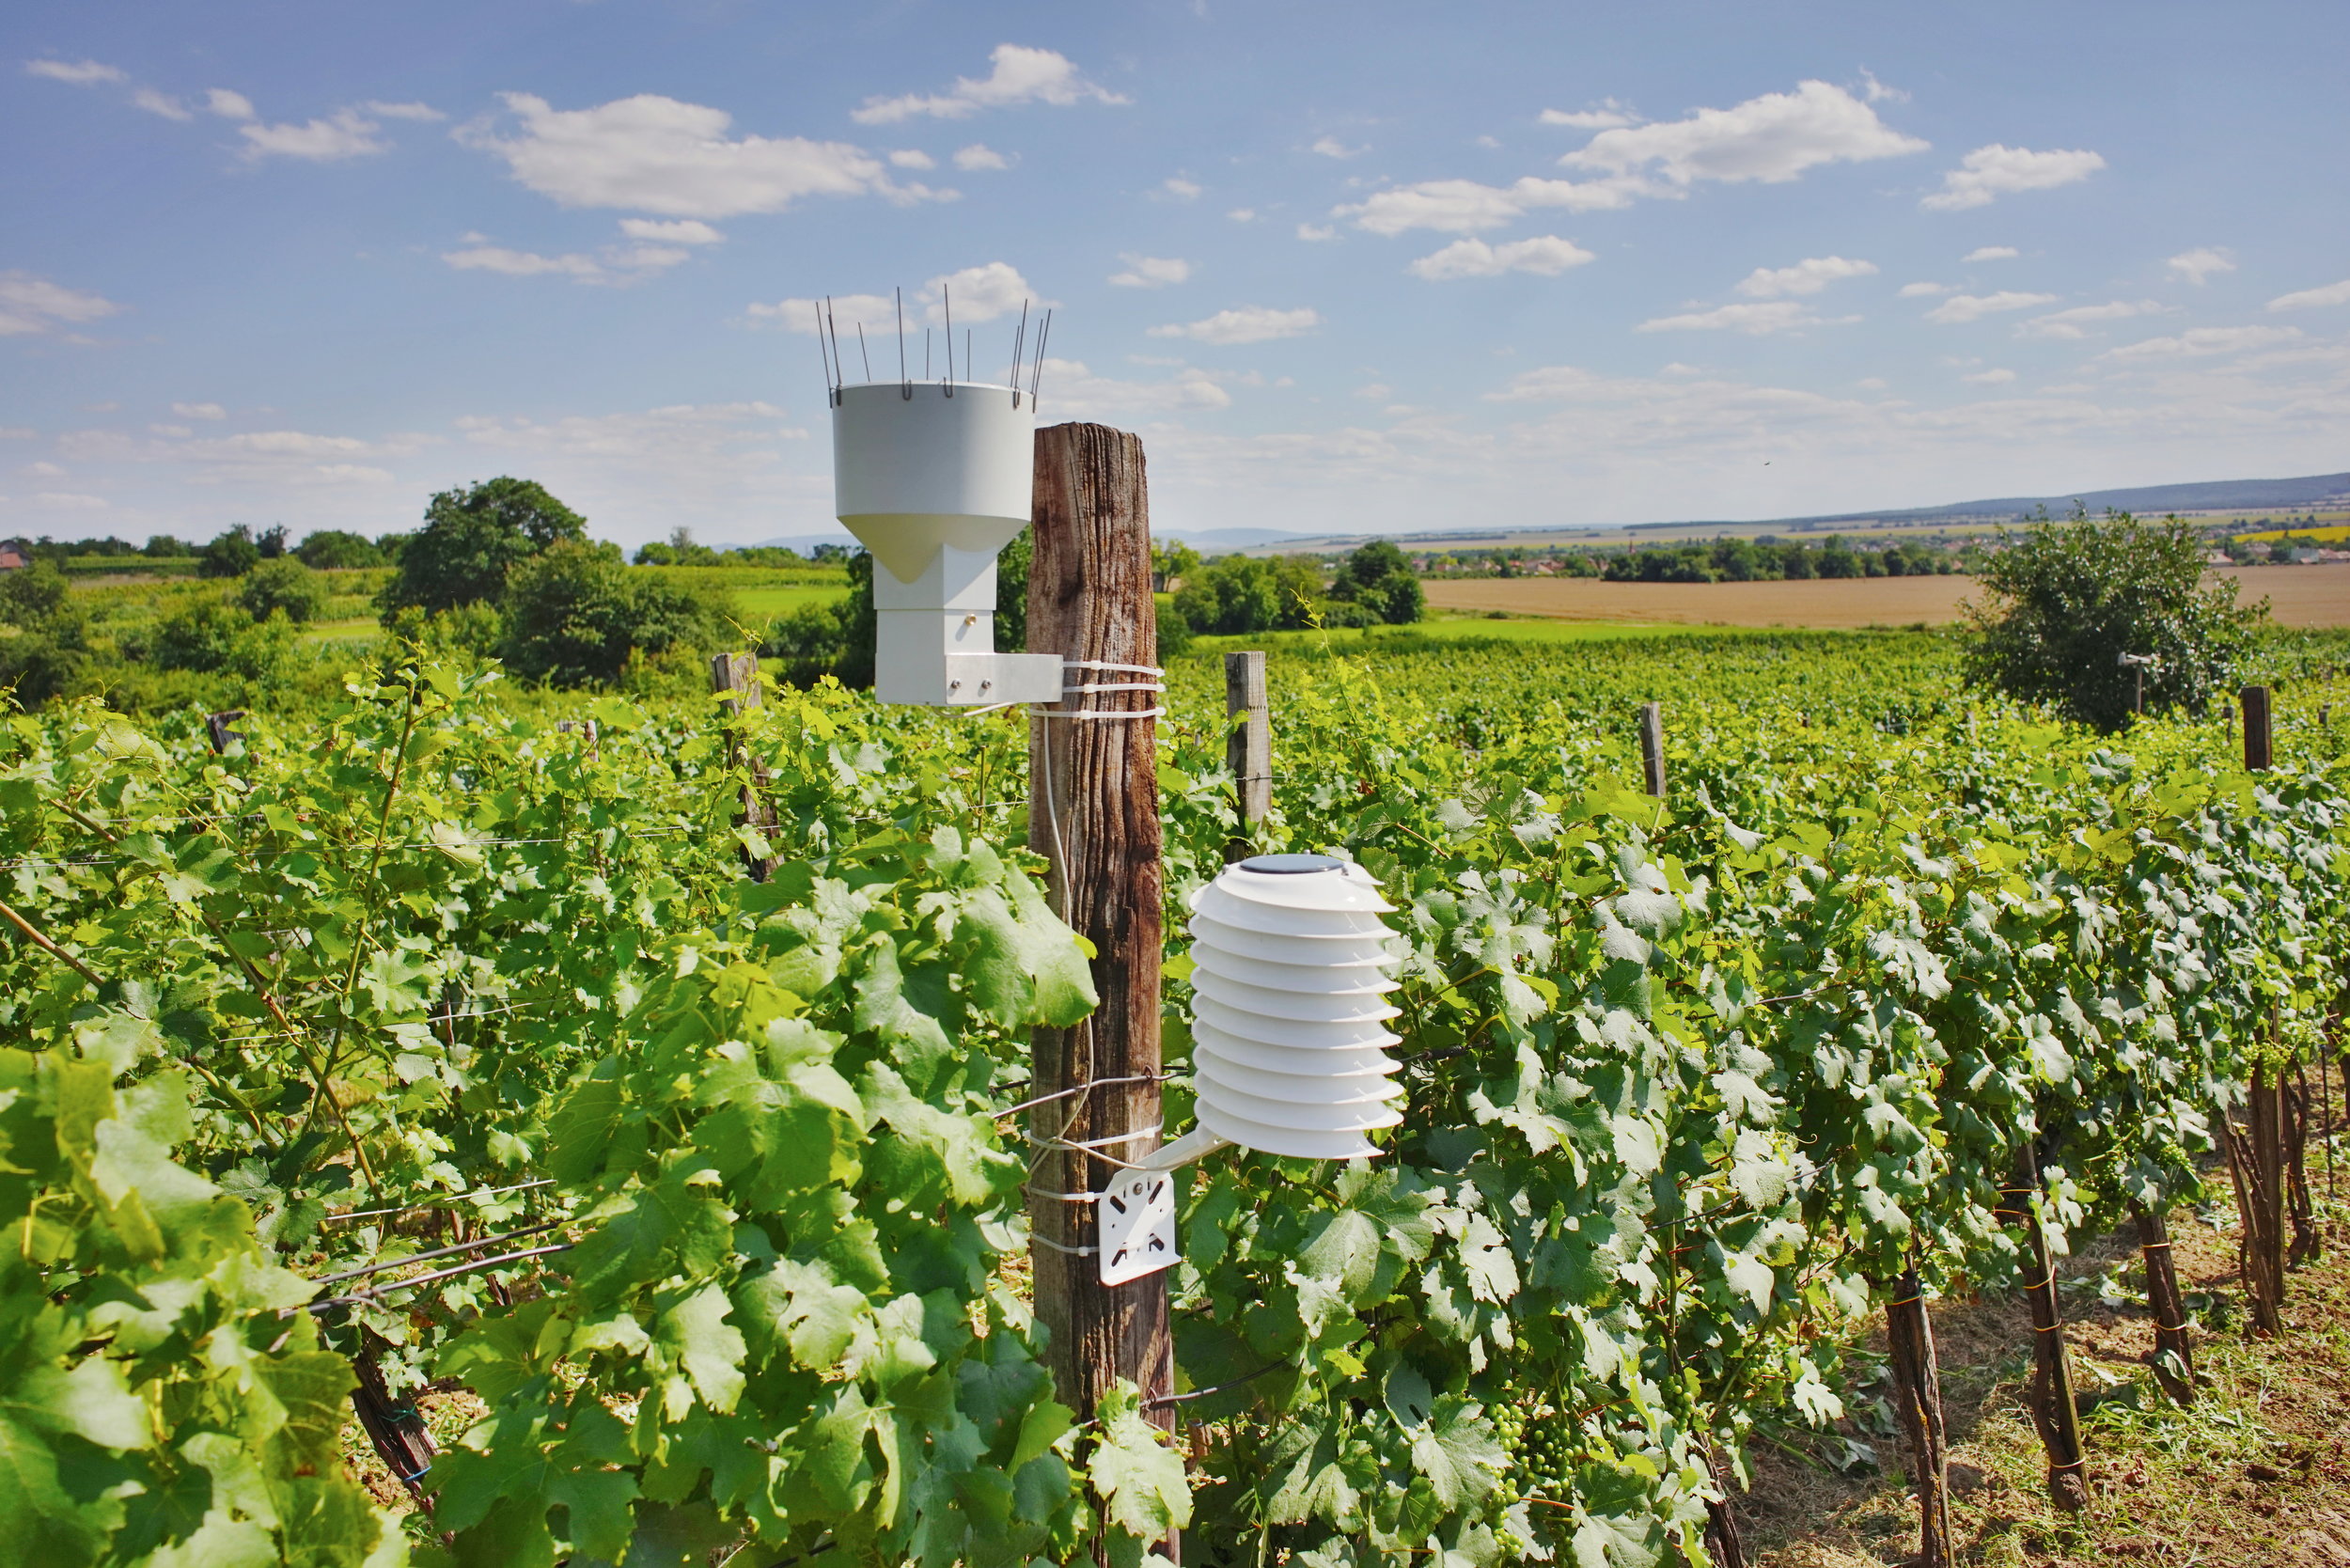 Agricultural weather station overlooking a wine yard